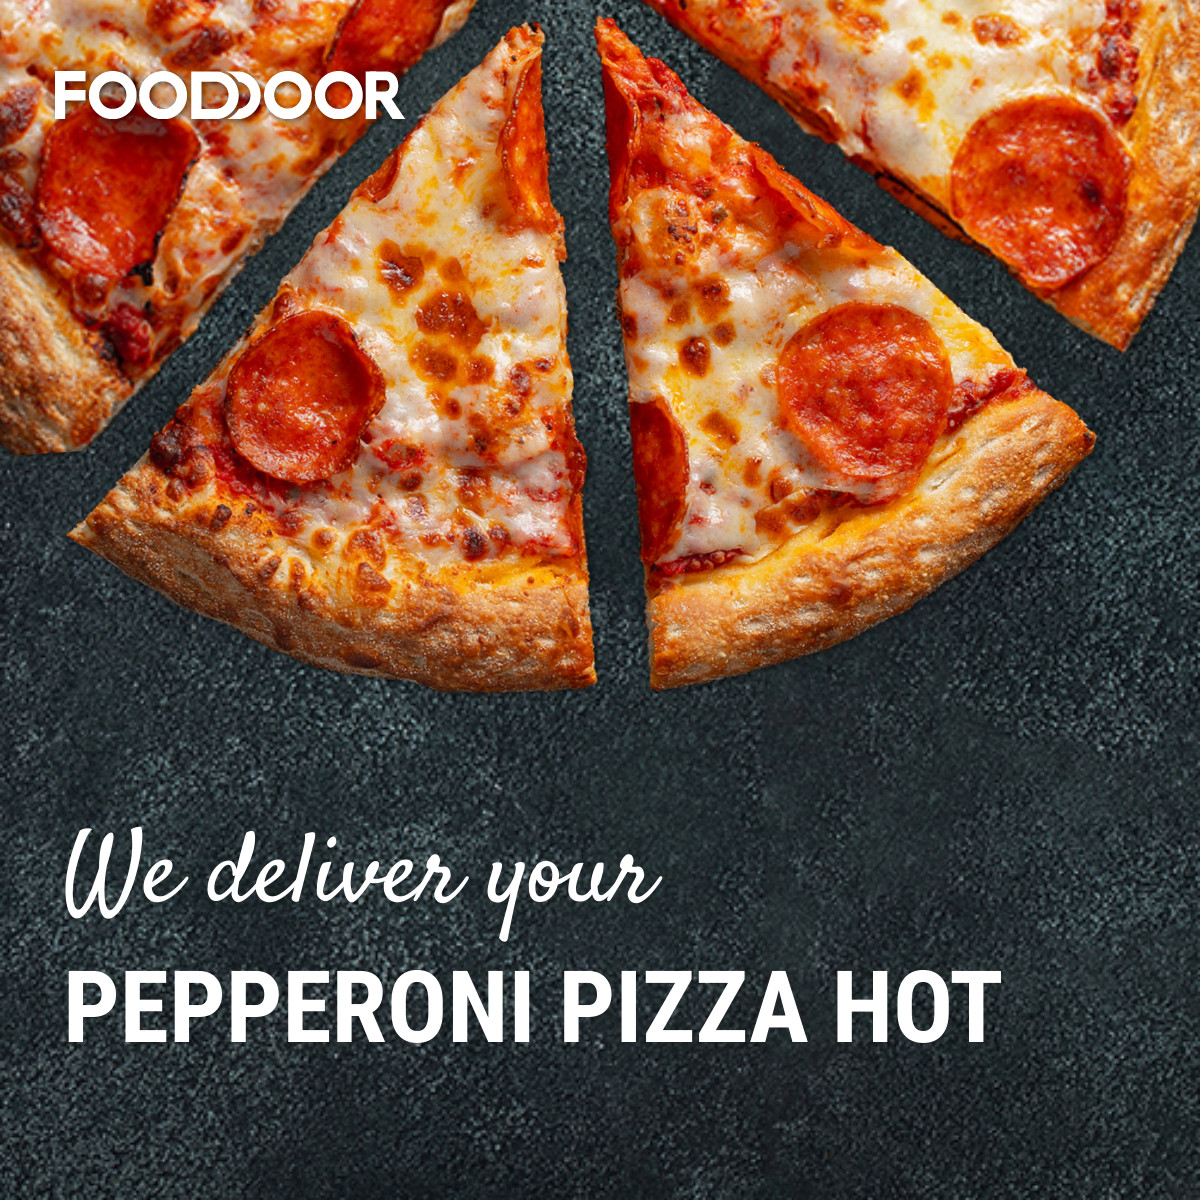 Pepperoni Pizza Delivery FoodDoor